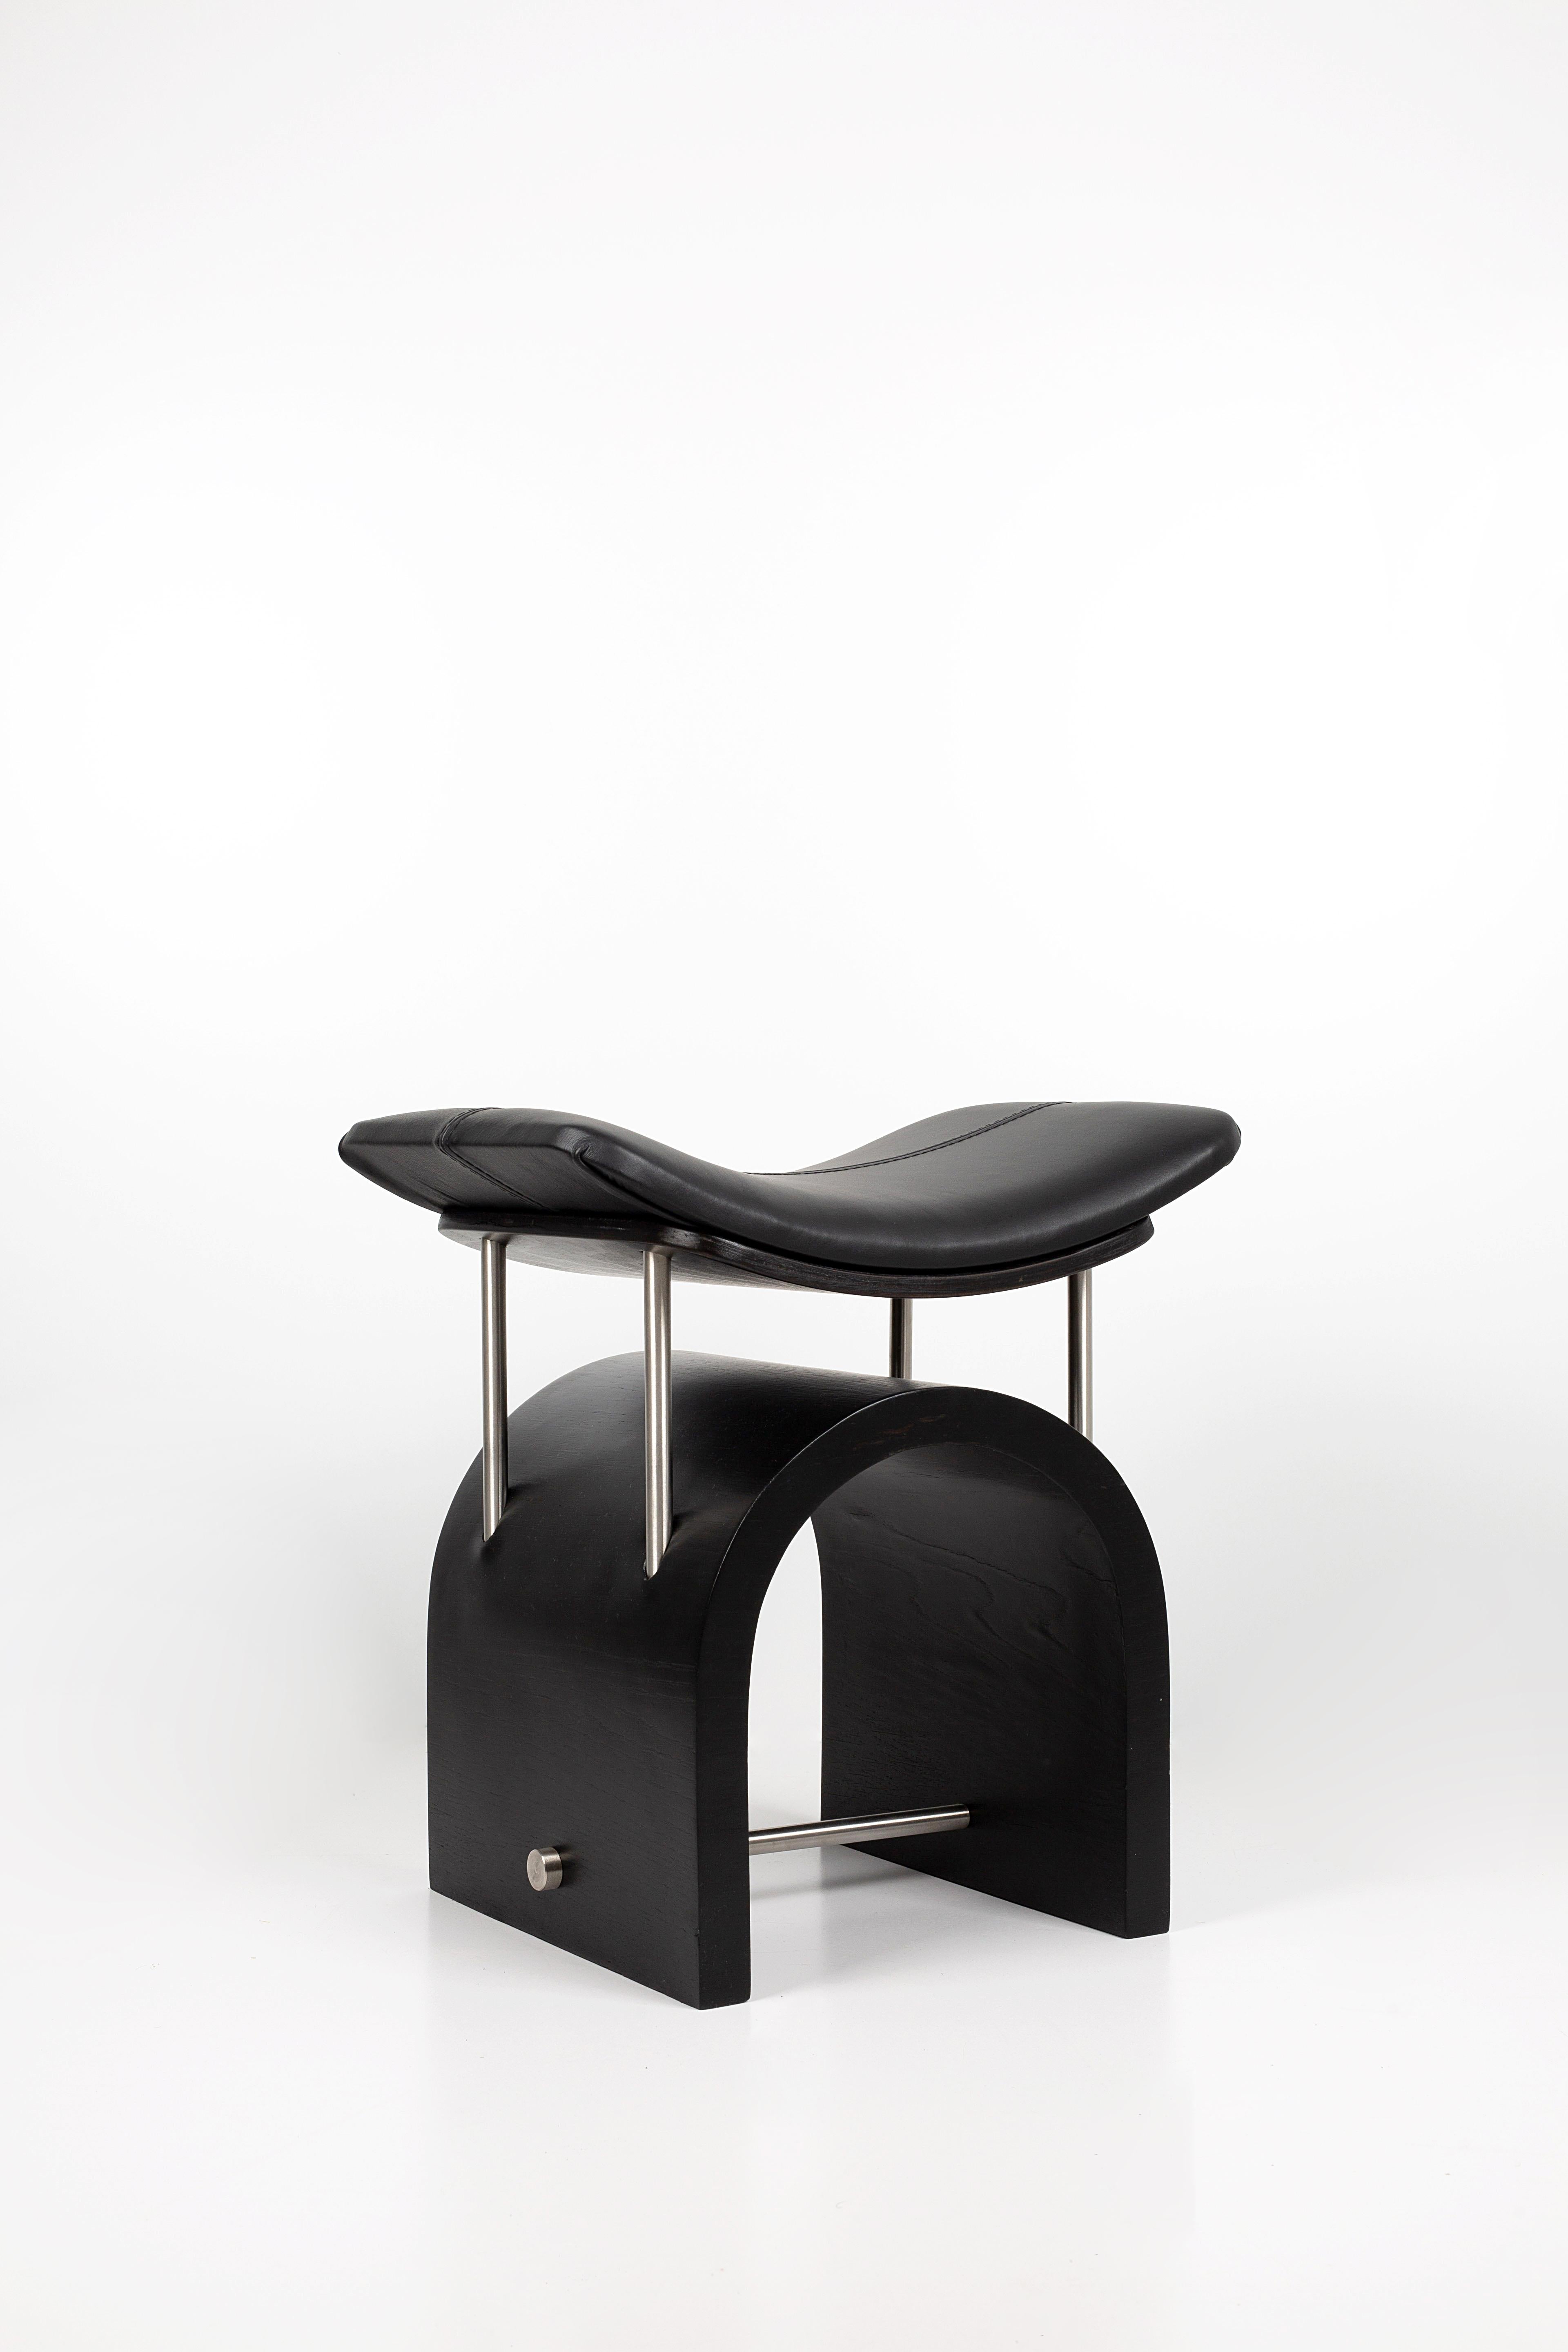 Black leather wing stool by Studio Laf
Dimensions: L 43 cm x W 35 x H 44 cm
Materials: Plywood, stainless steel, leather
Structure: Black plywood
Available: different colours leather: Brown, black, antique brown, cherry red.


It emerged with